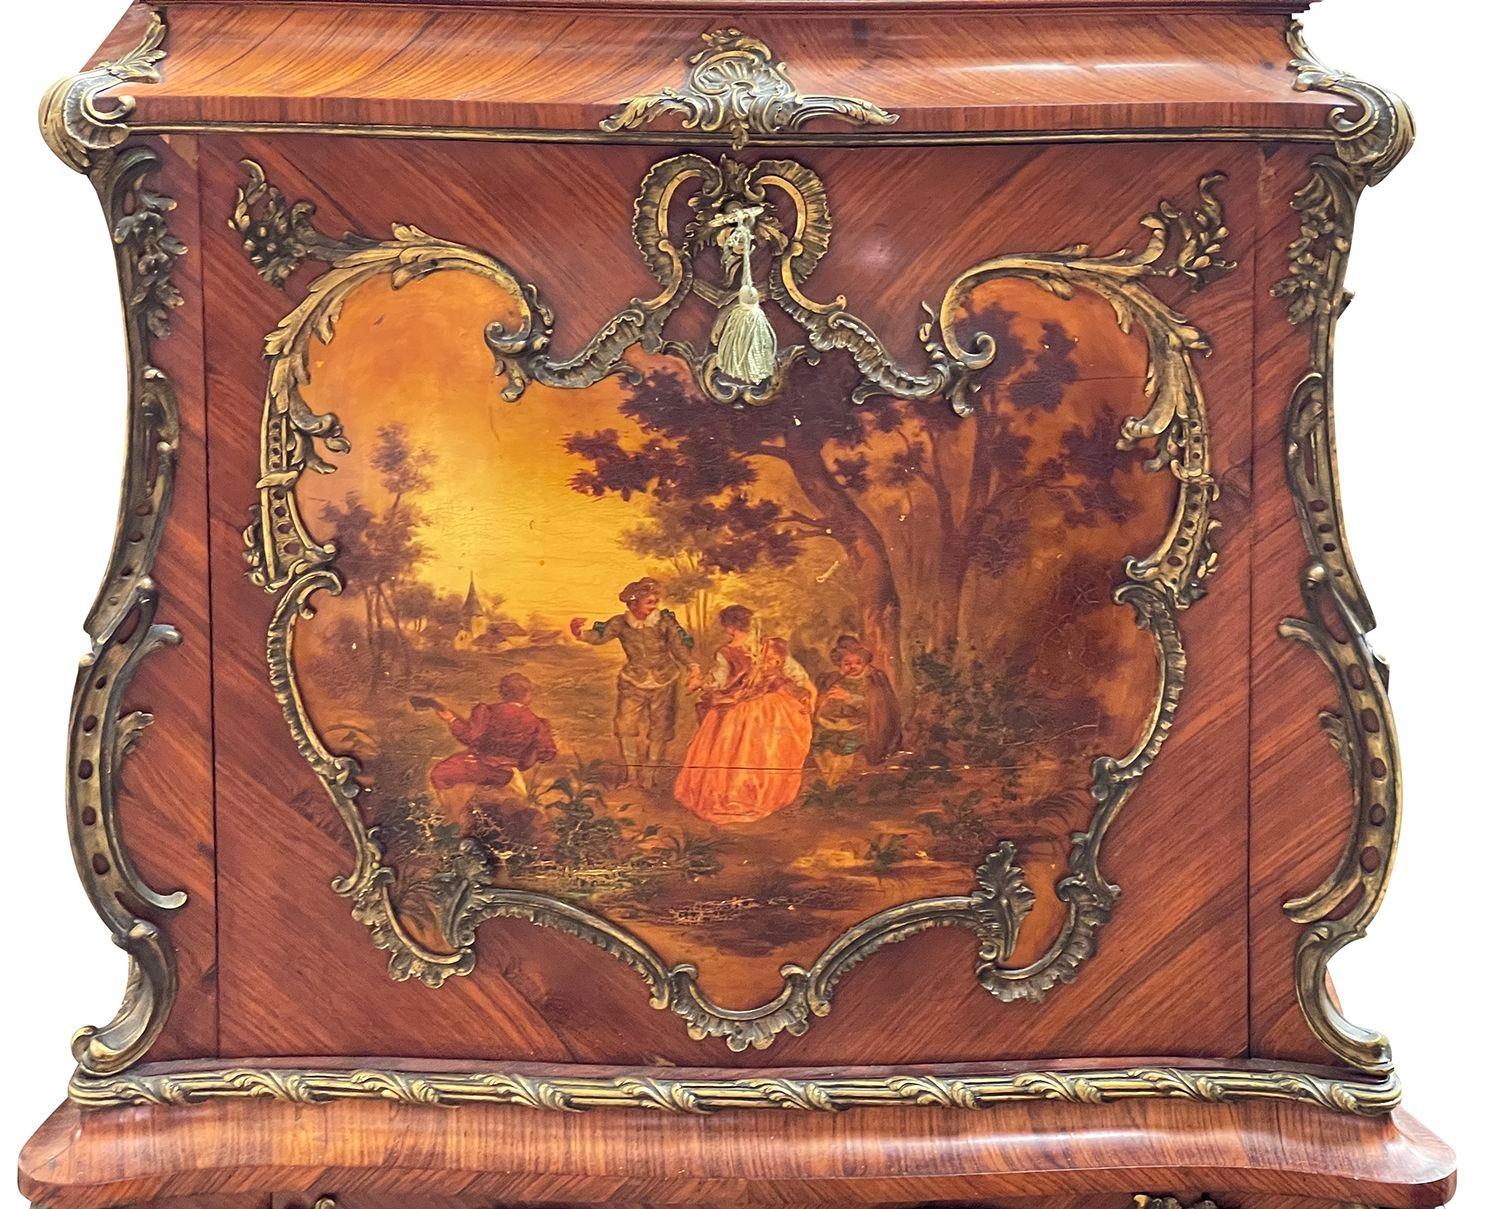 A very good quality late 19th Century French Louis XVI style secretaries abbattant, having bombe shaped sides, gilded rococo style scrolling ormolu mounts. Wonderful hand painted Verni Martin romantic to the centre of the fall, opening to reveal